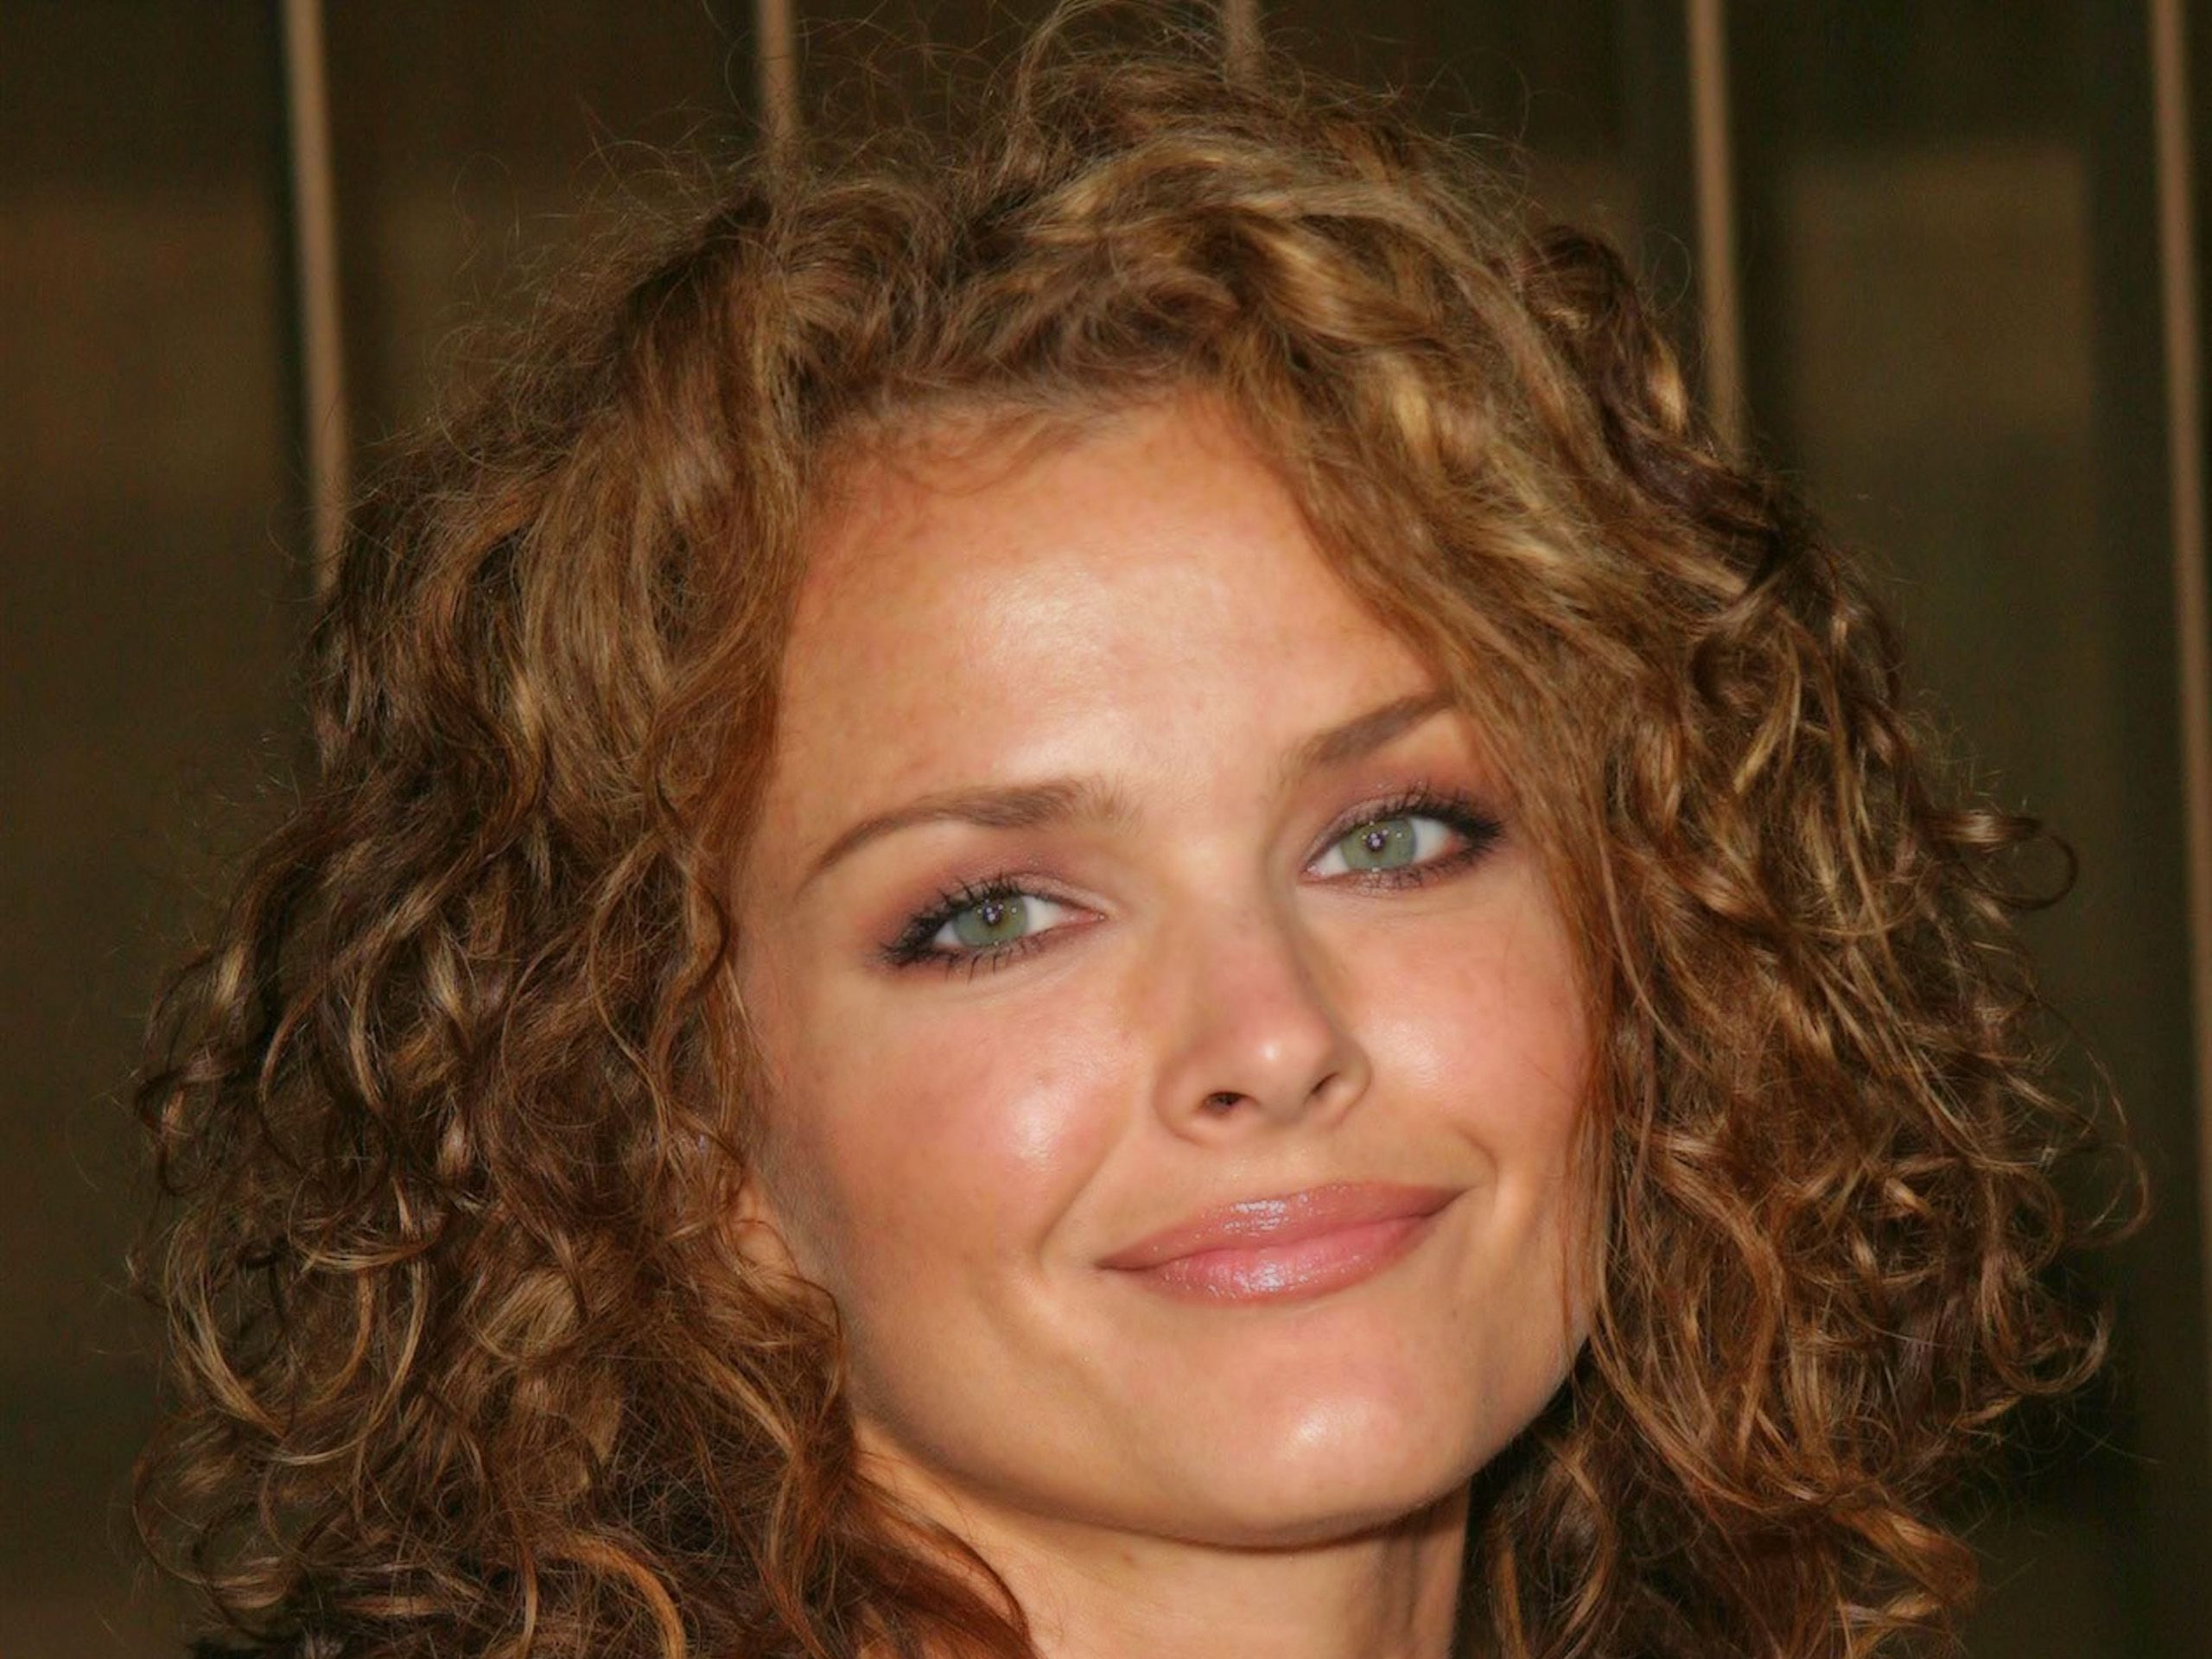 Dina Meyer Plastic Surgery and Body Measurements